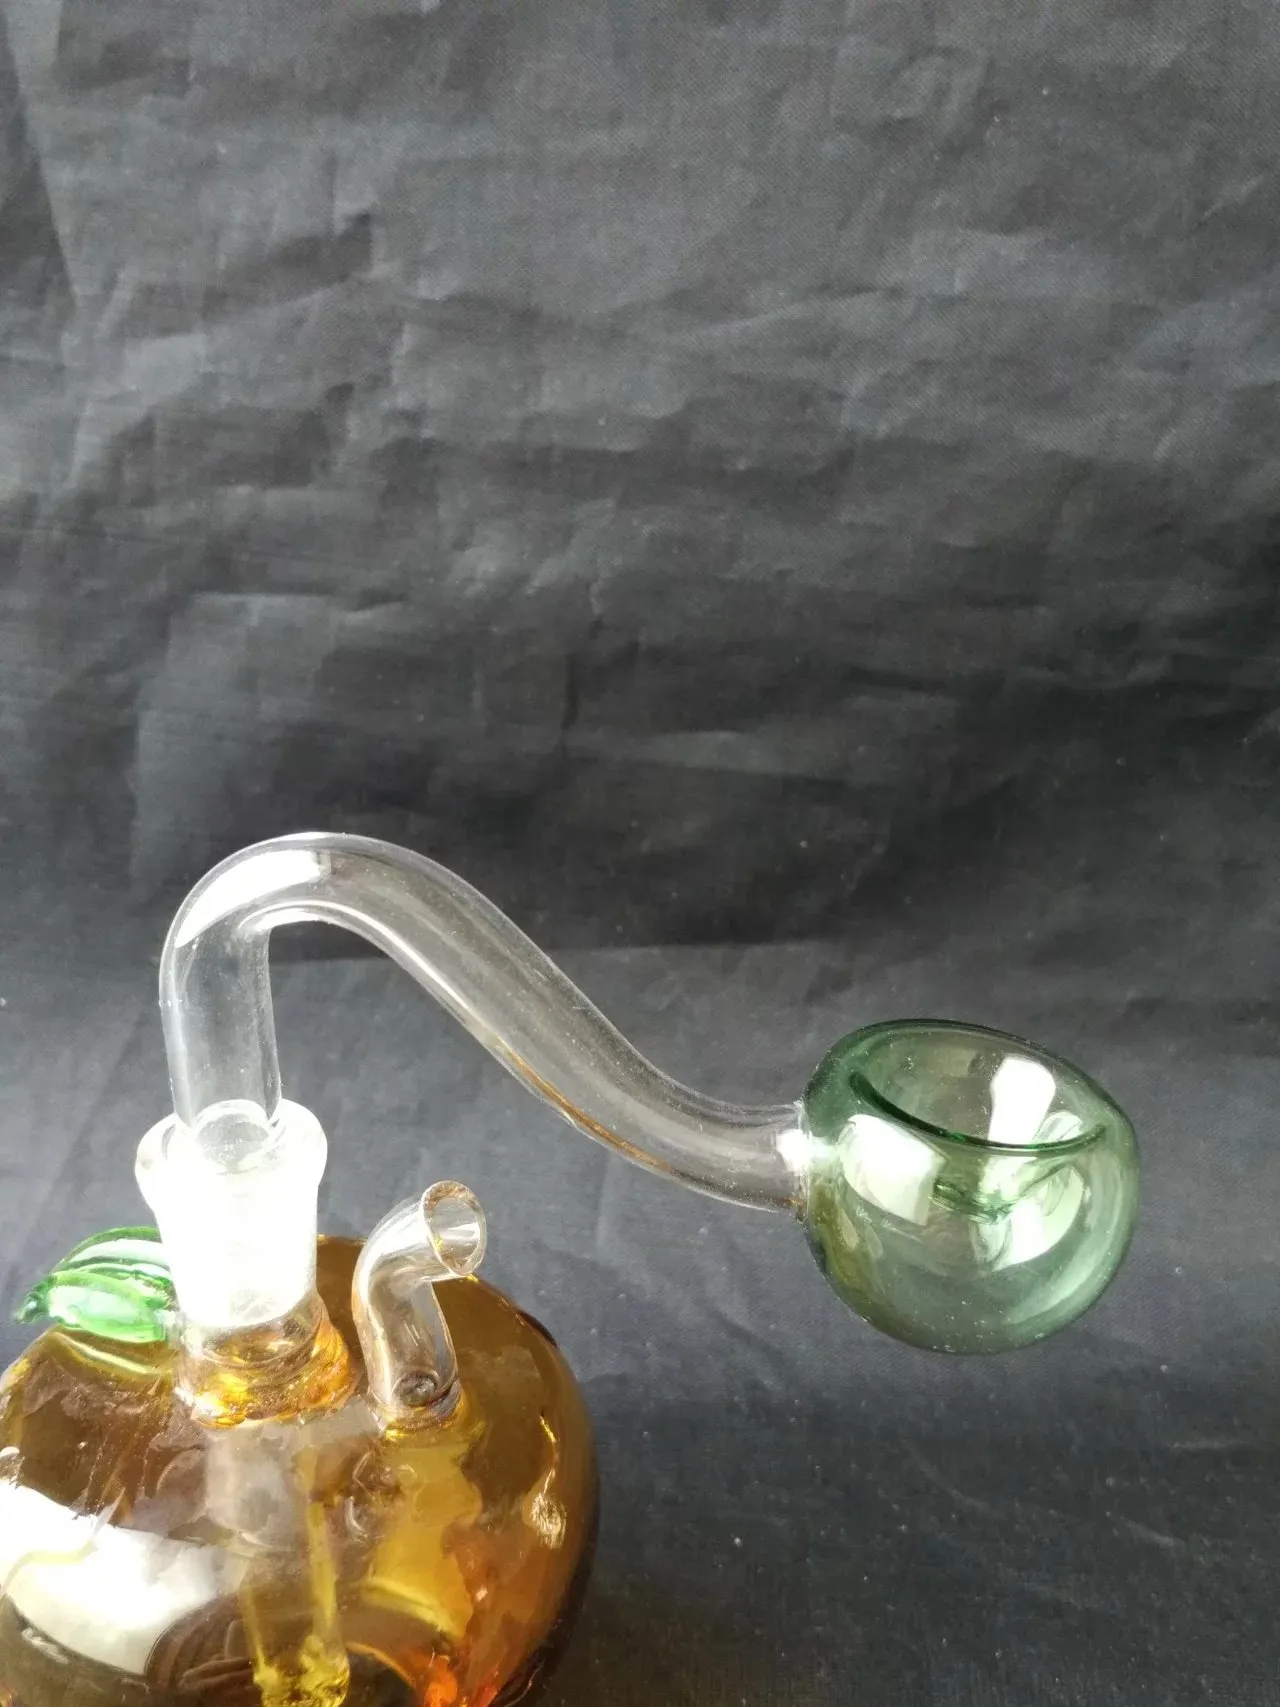 New S Fovea ,Wholesale Bongs Oil Burner Pipes Water Pipes Glass Pipe Rigs Smoking